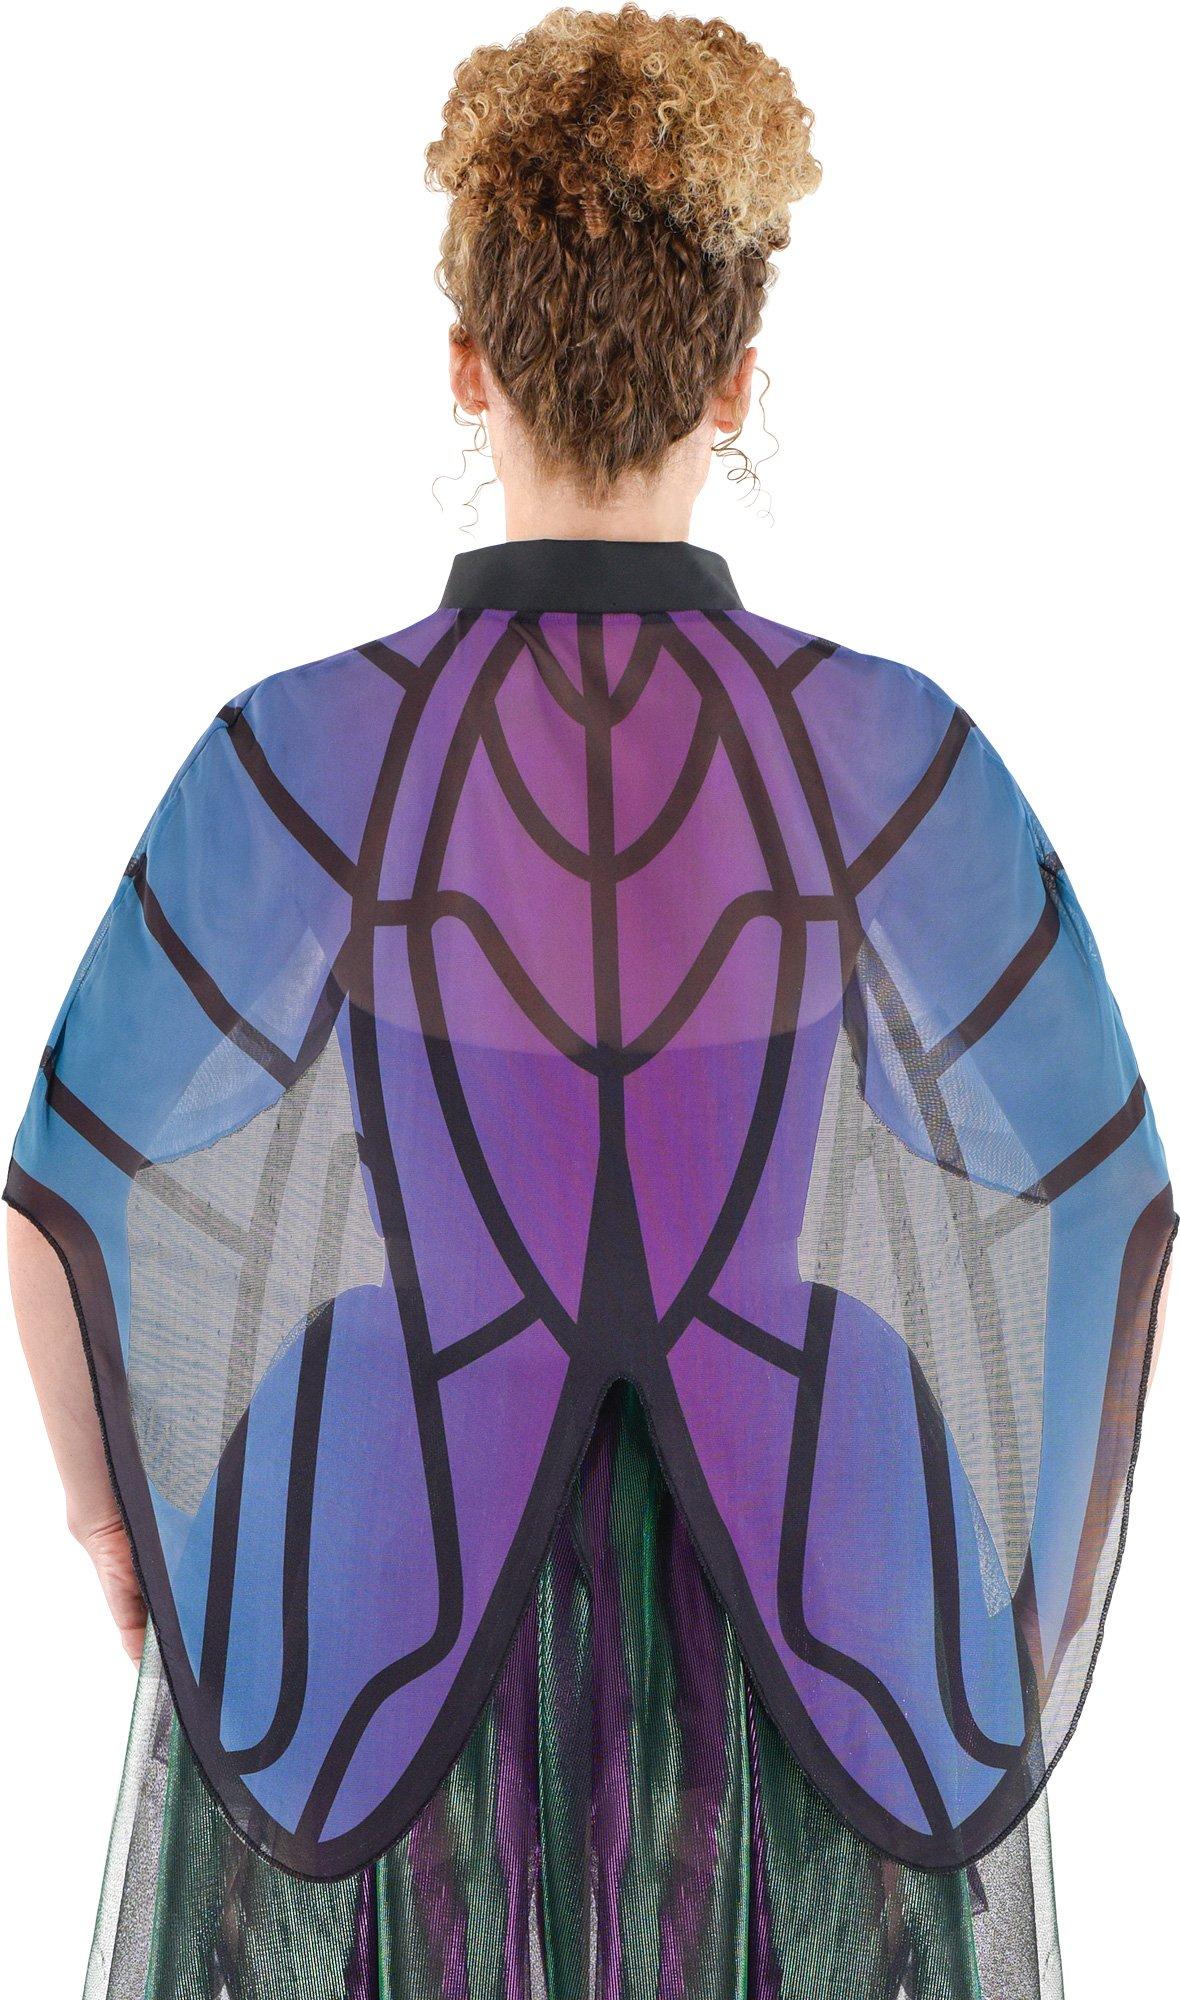 Adult Insect Wings Sheer Cape